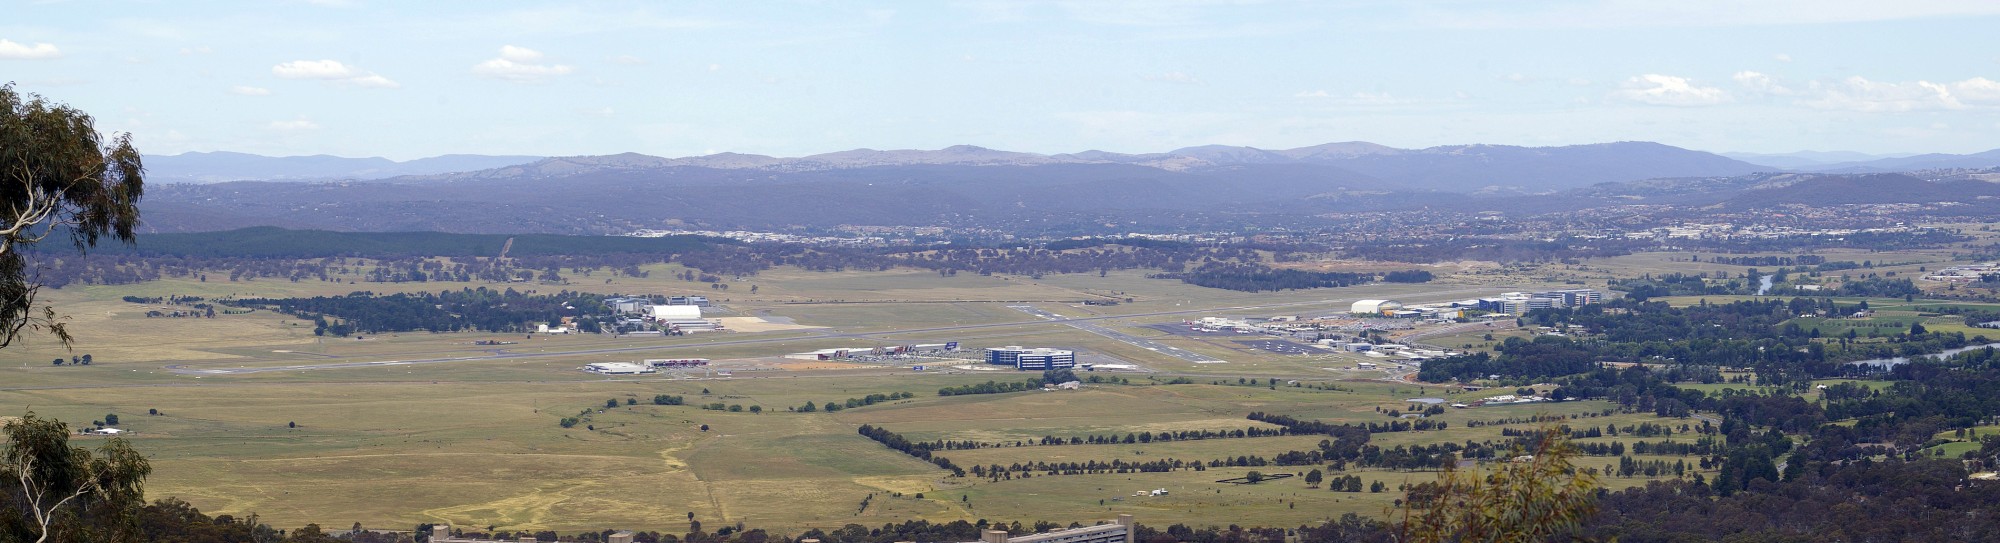 View of Fairbairn from Mount Ainslie